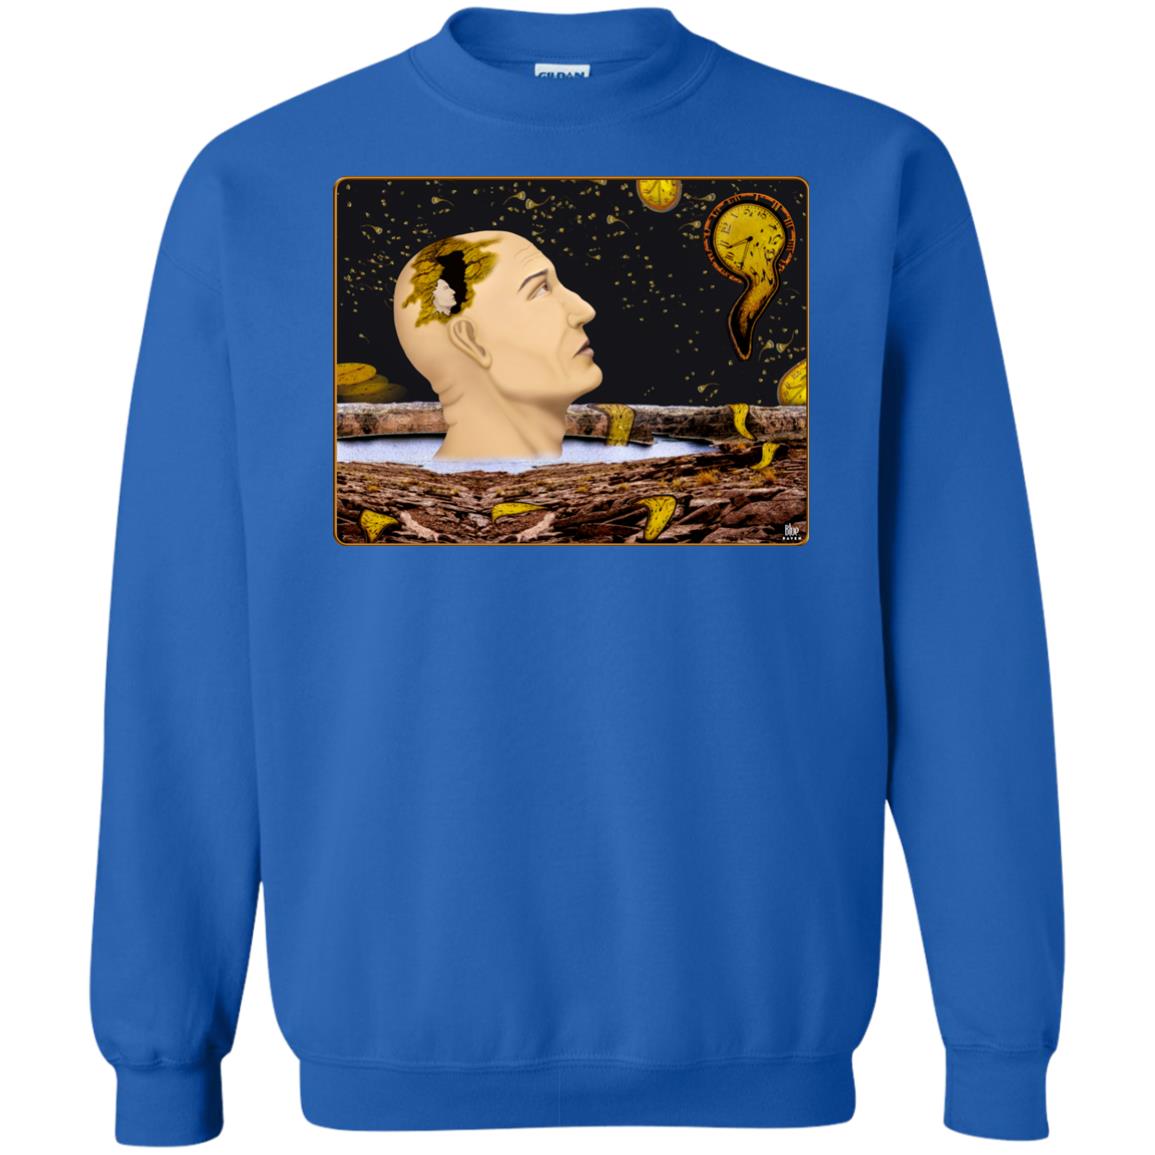 EARTH TIME RUNNING OUT - Men's Crew Neck Sweatshirt